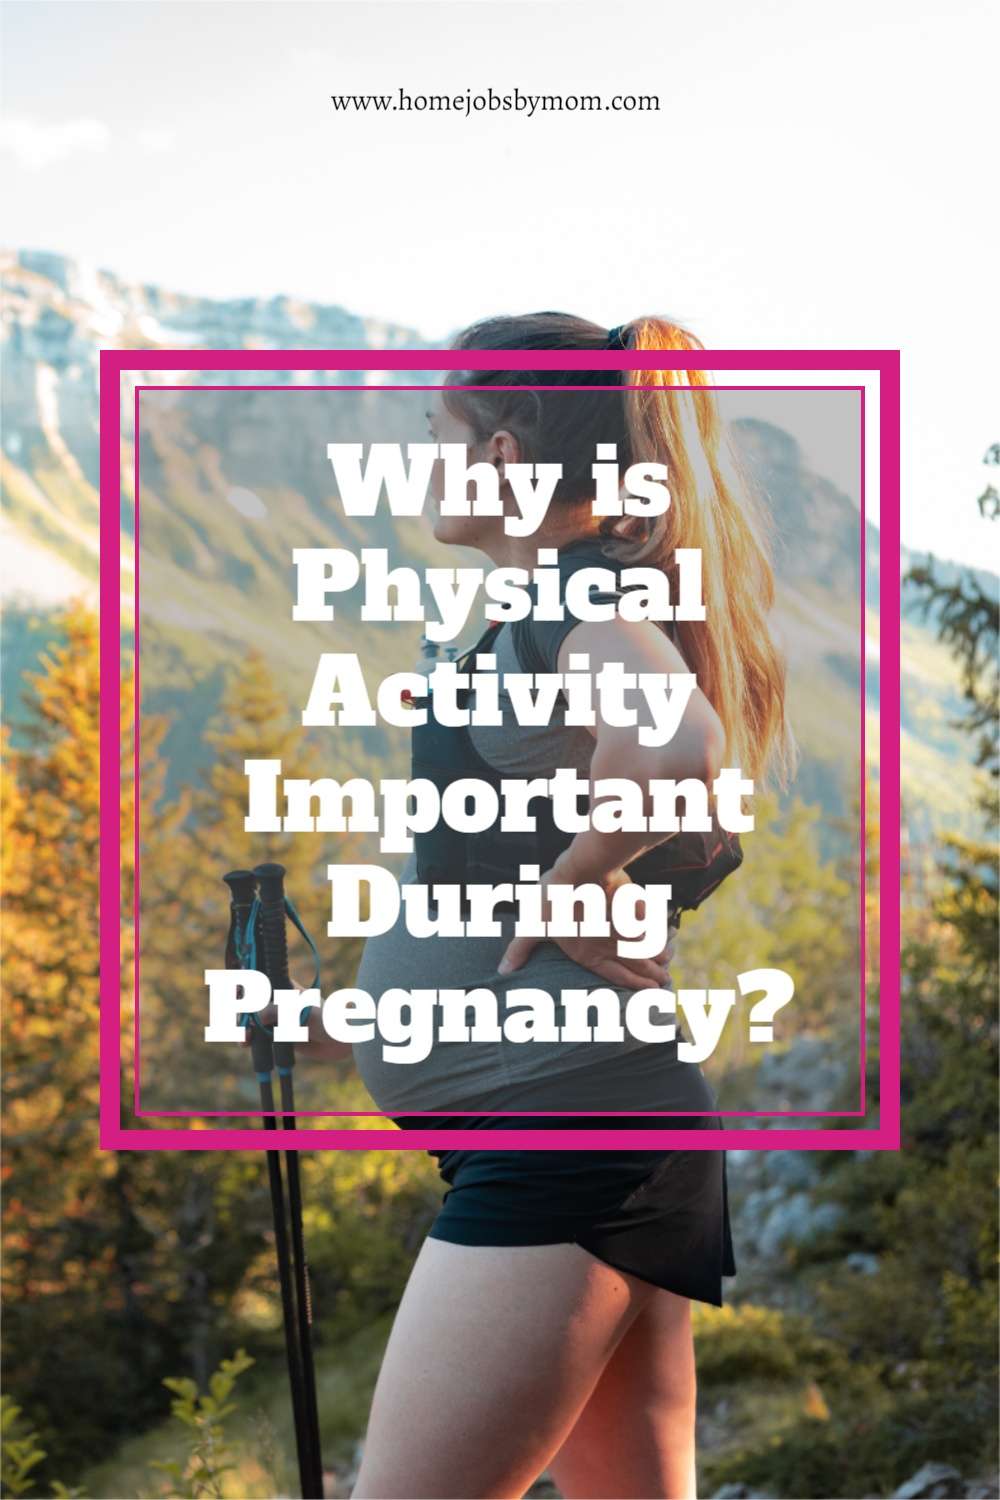 Why is Physical Activity Important During Pregnancy?